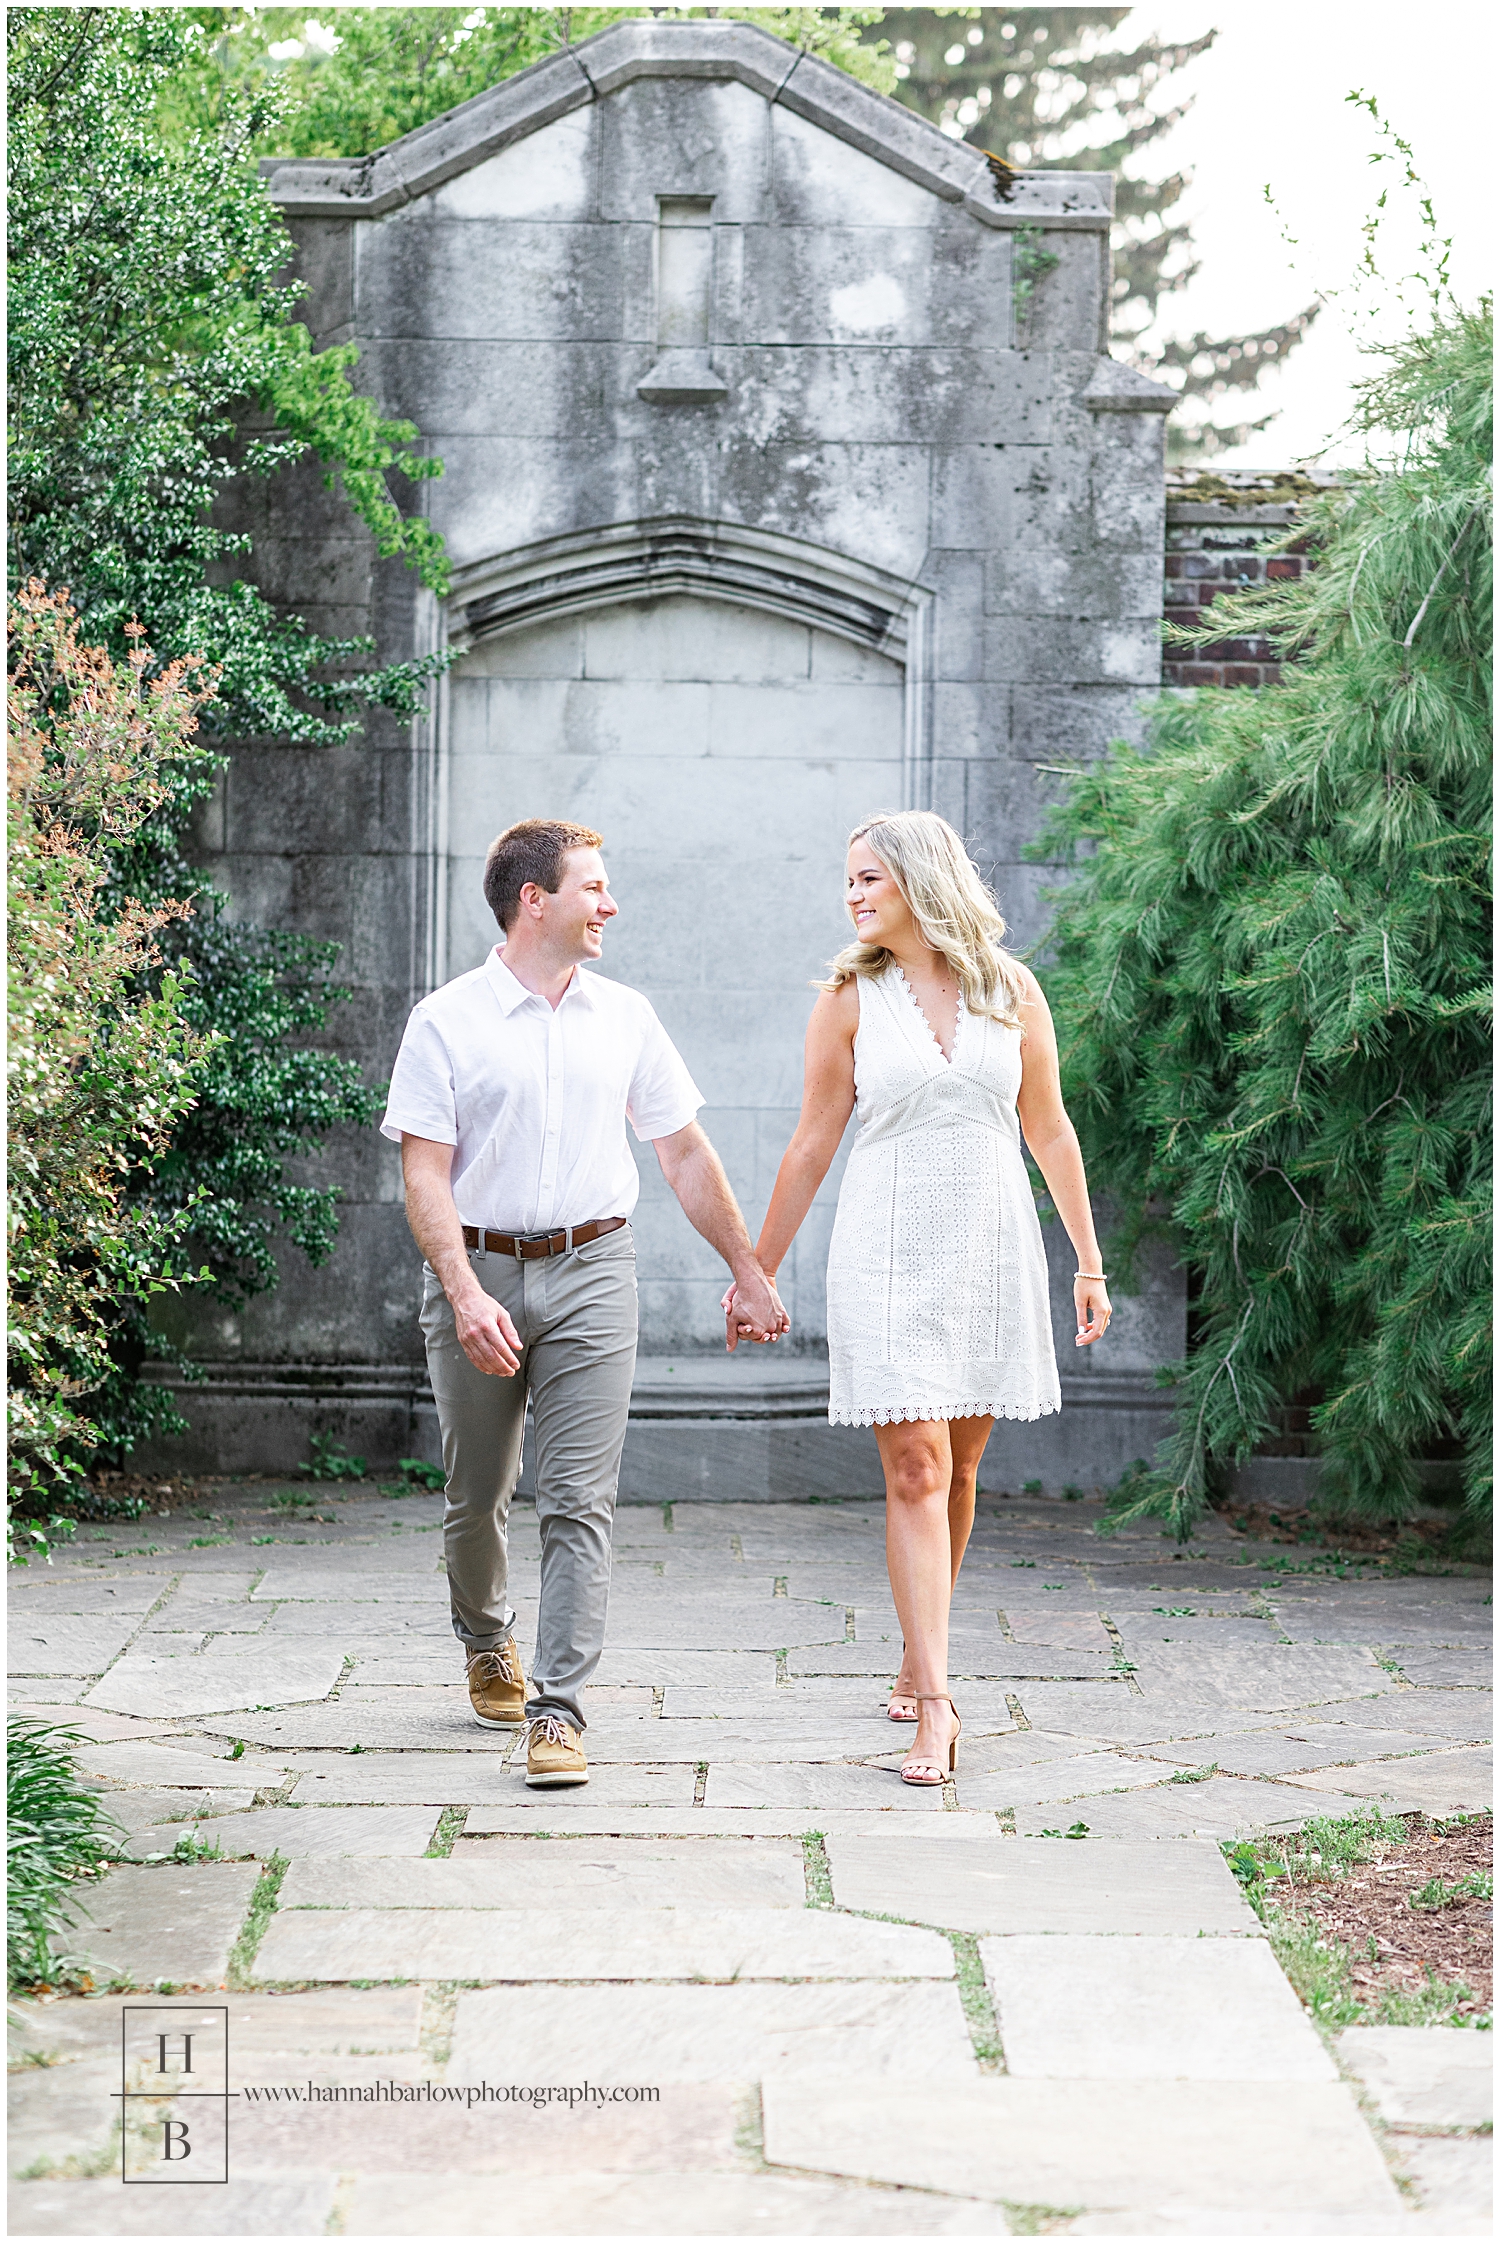 Couple walks by lush green foliage and stone wall for engagement photos.